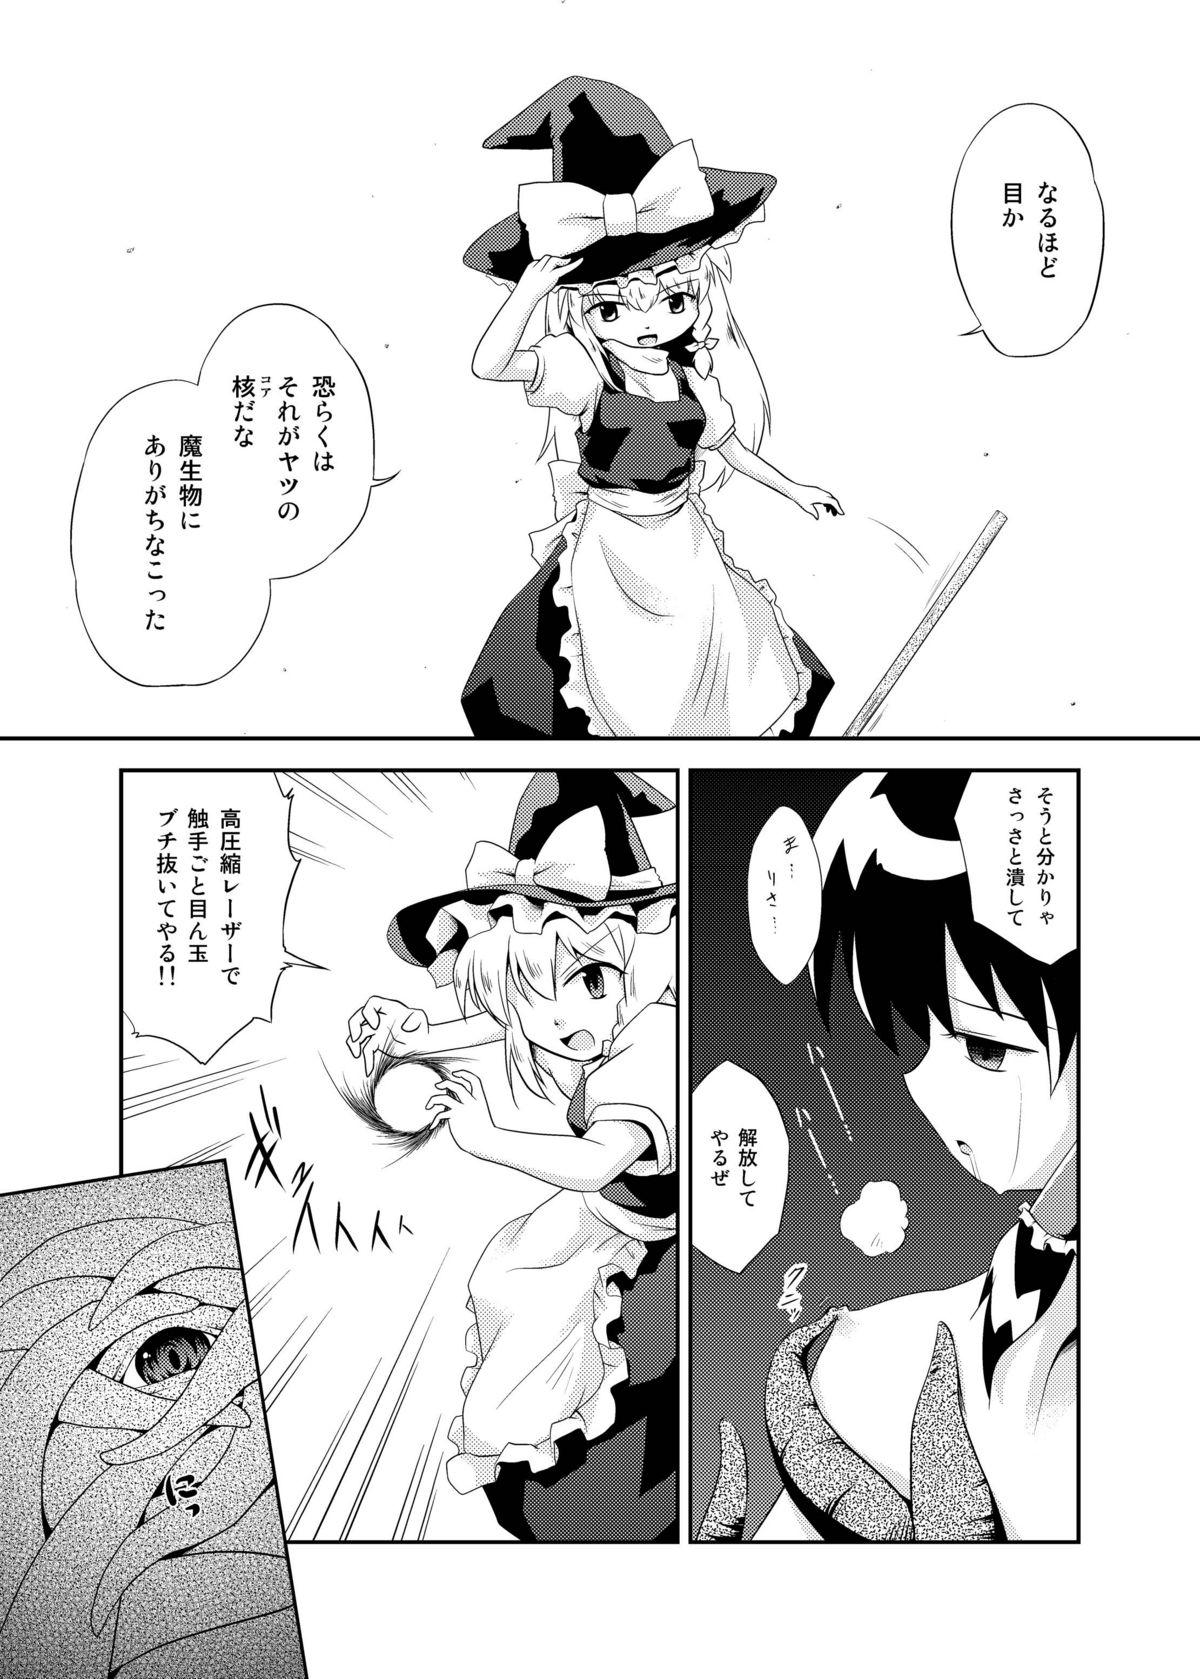 Jerking DISARM CLOTHES - Touhou project 18 Porn - Page 6